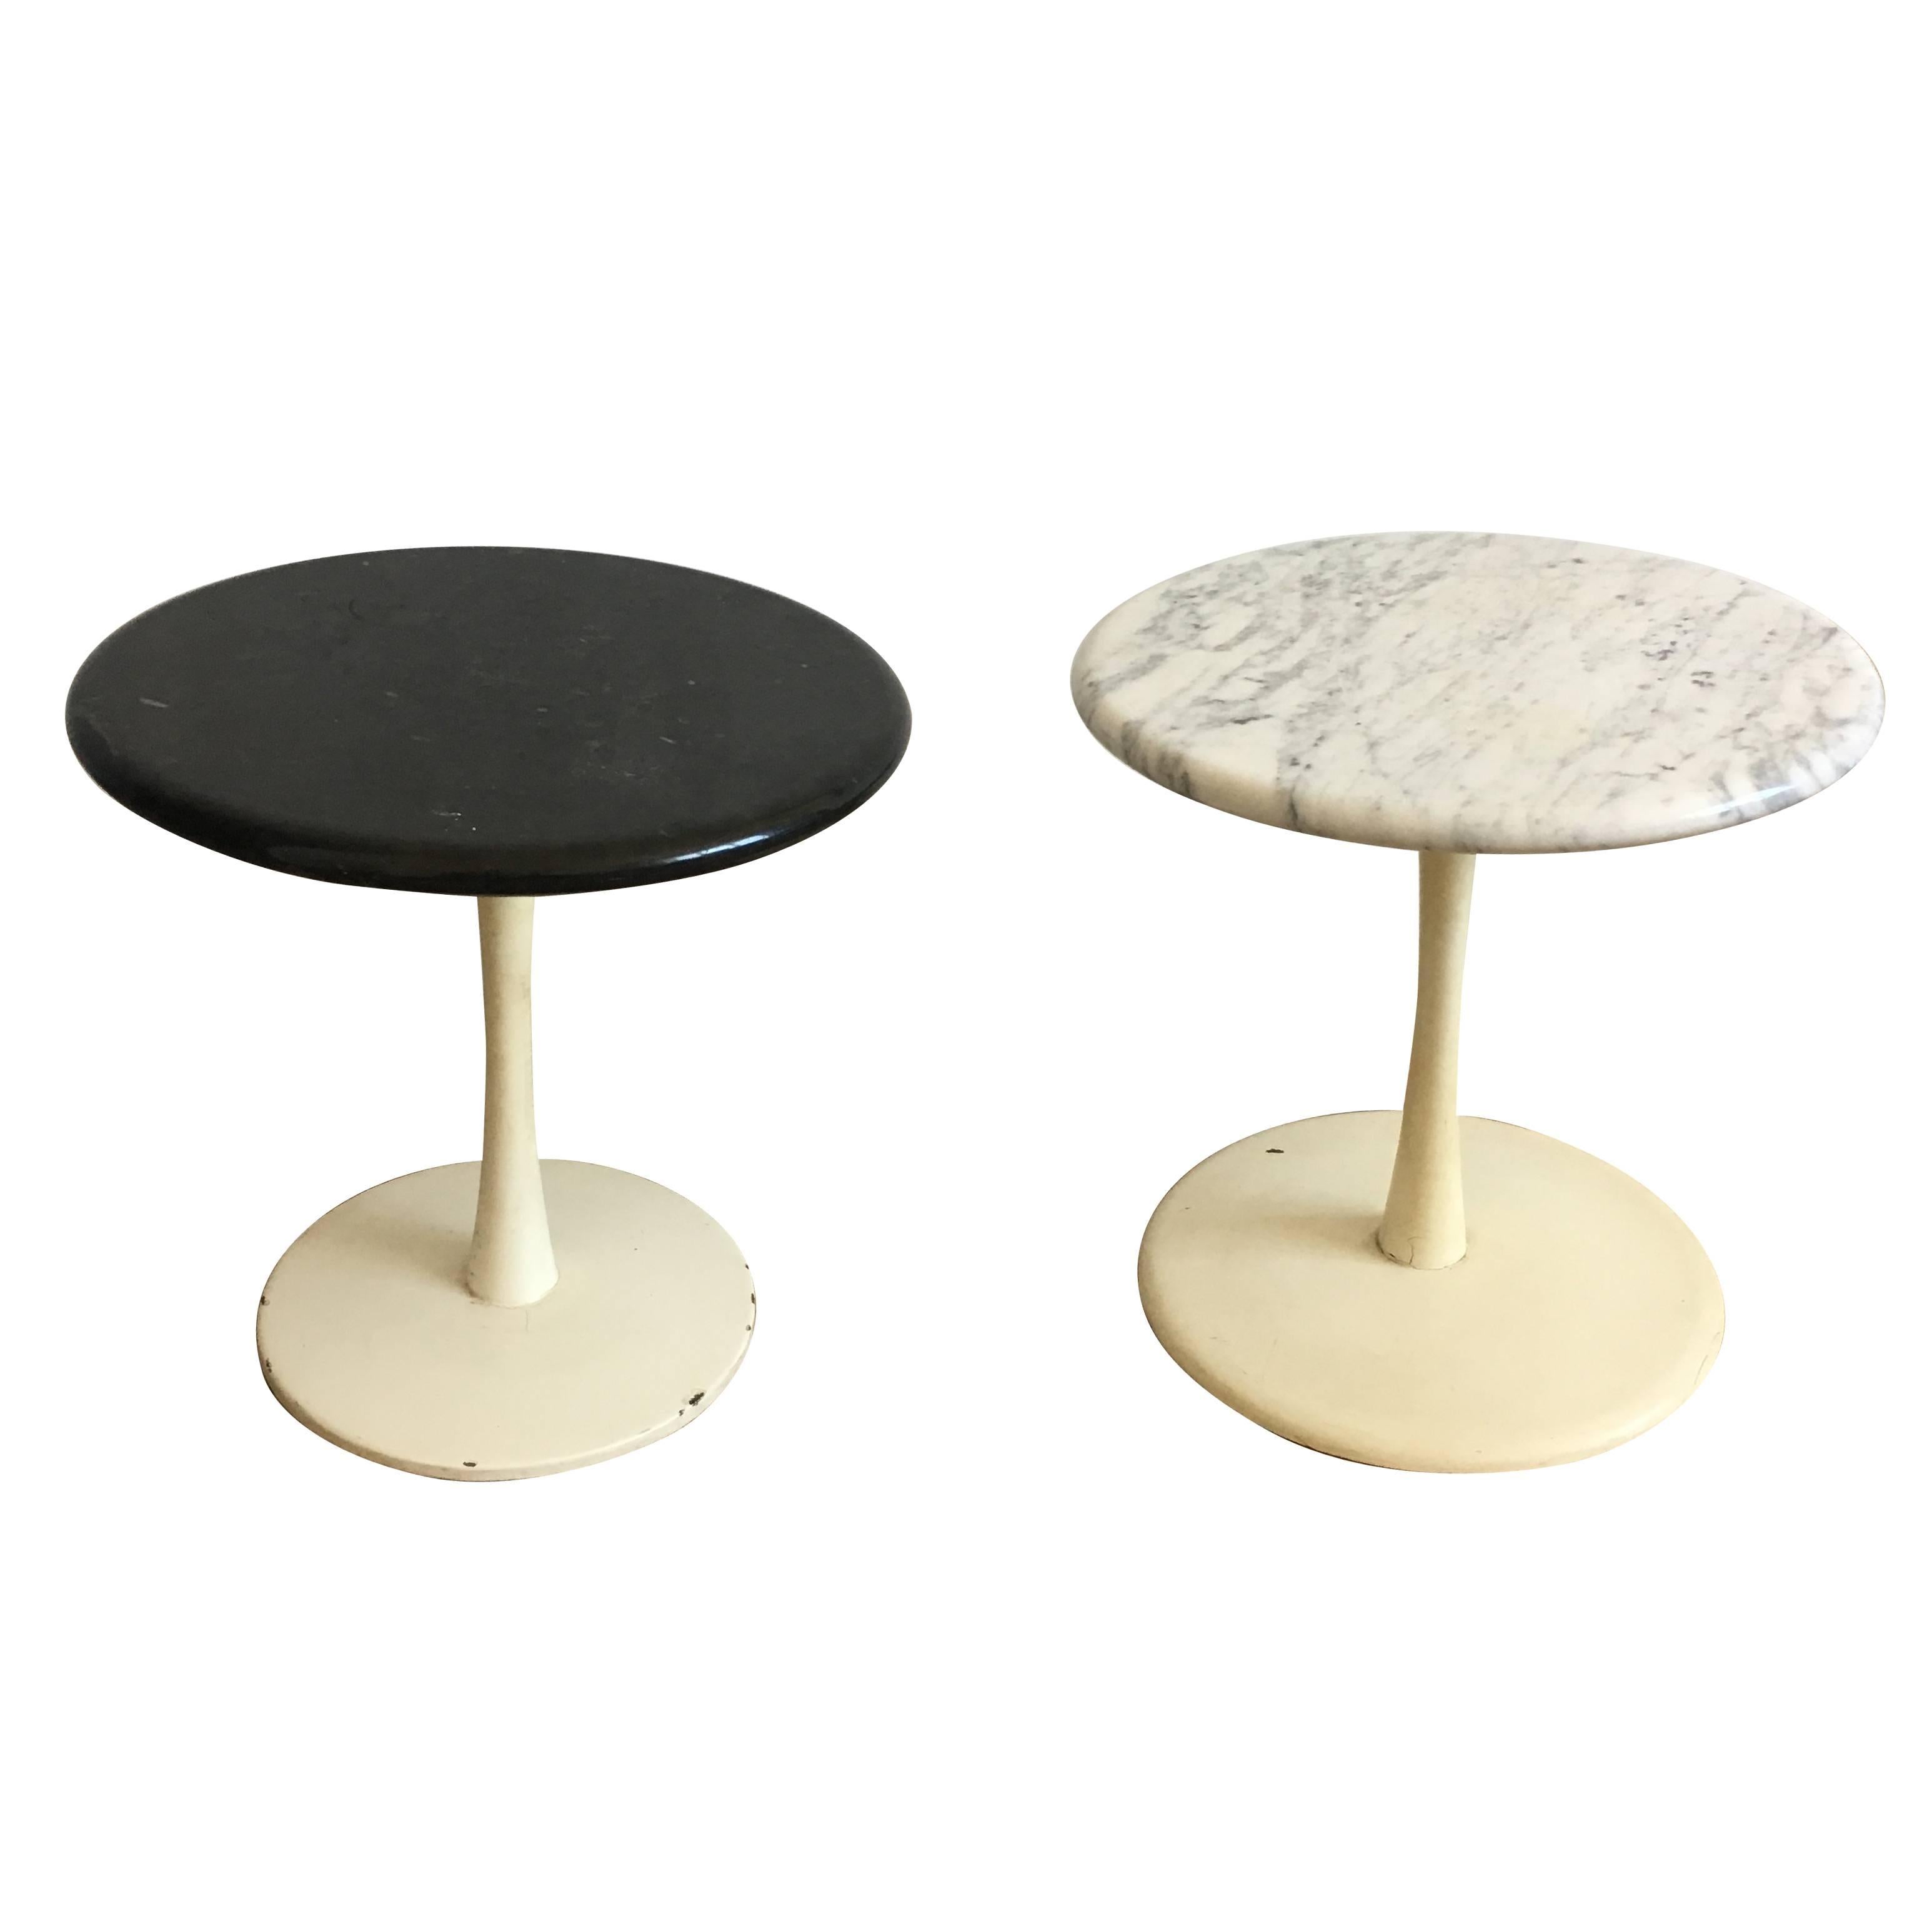 Erwin and Estelle Laverne Pair of Occasional Tables, 1960